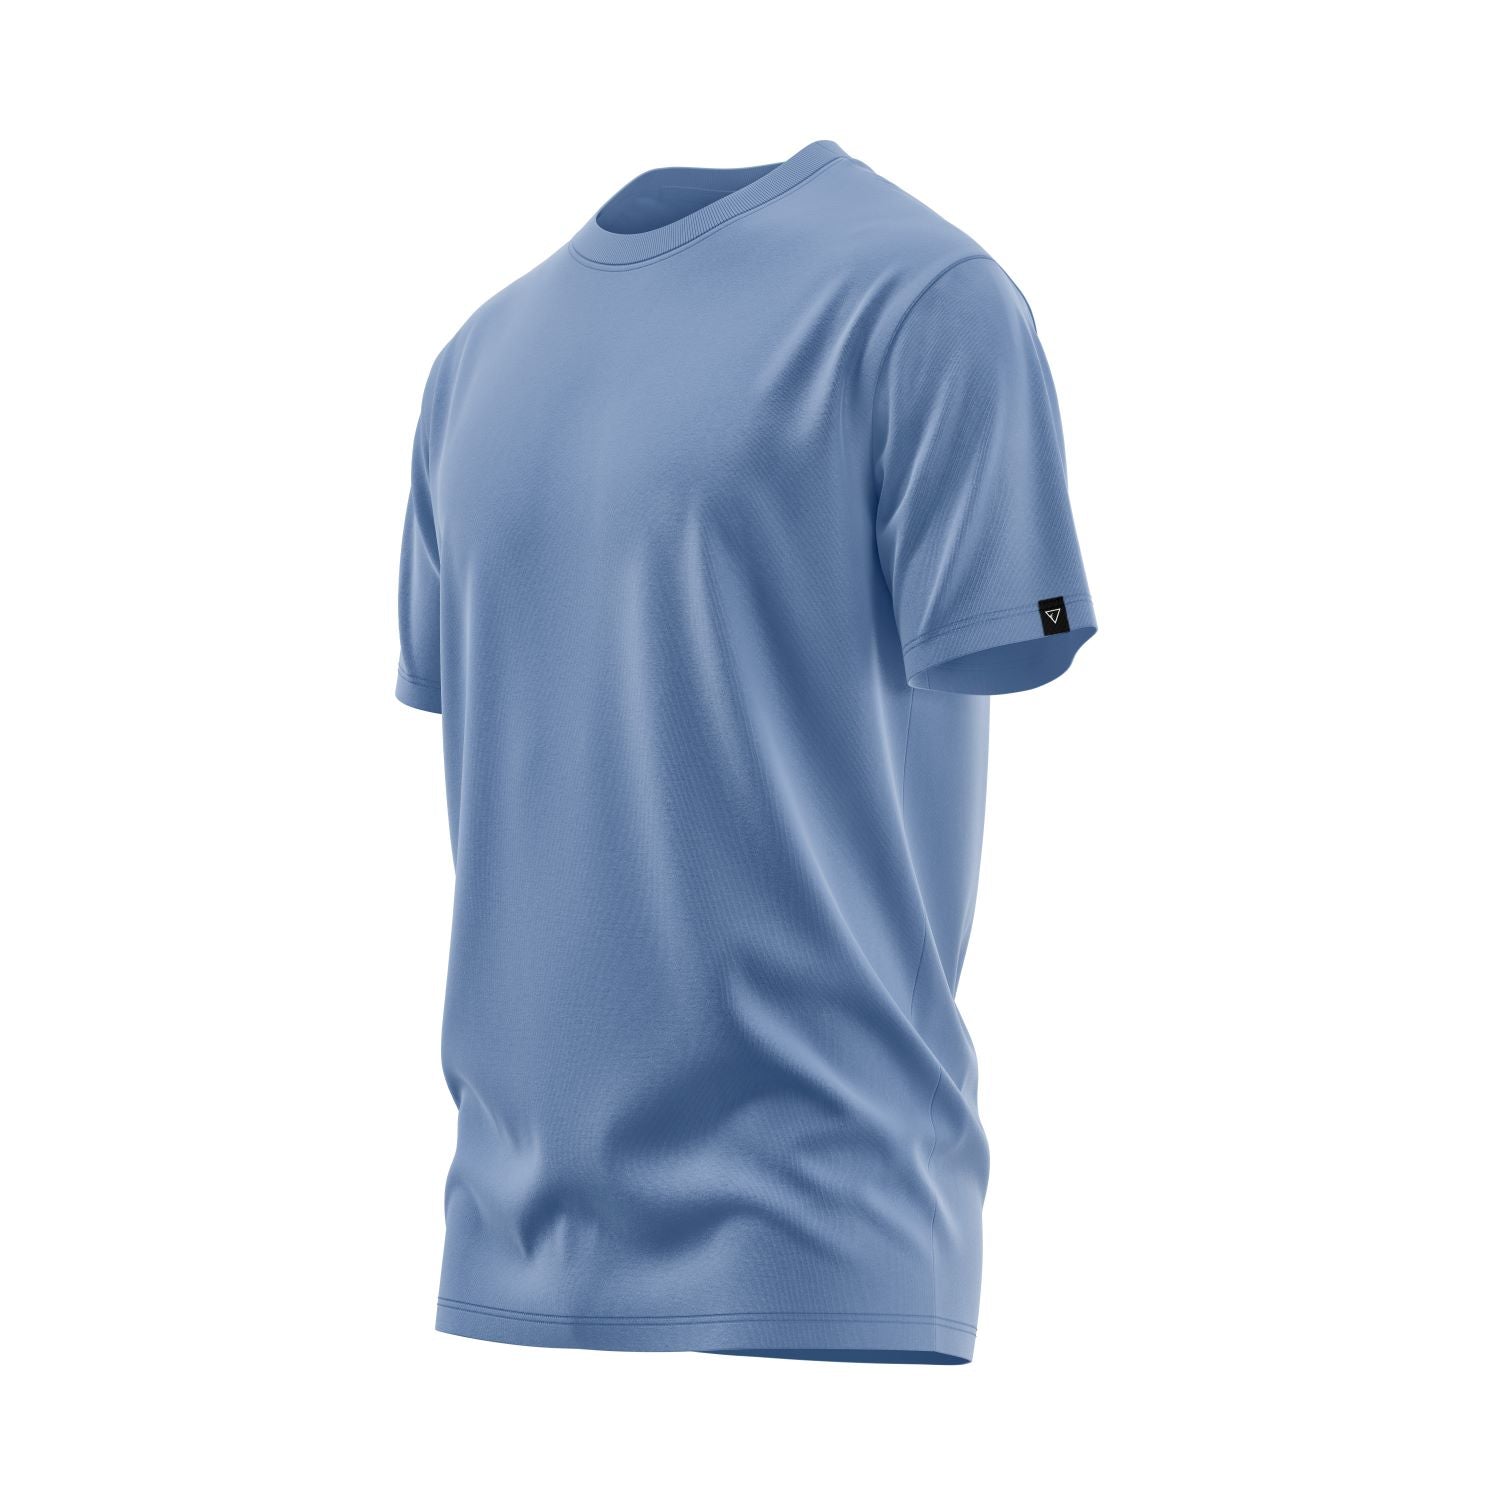 Seatec Outfitters Performance Shirts MEN'S ACTIVE | SKY BLUE | SHORT SLEEVE